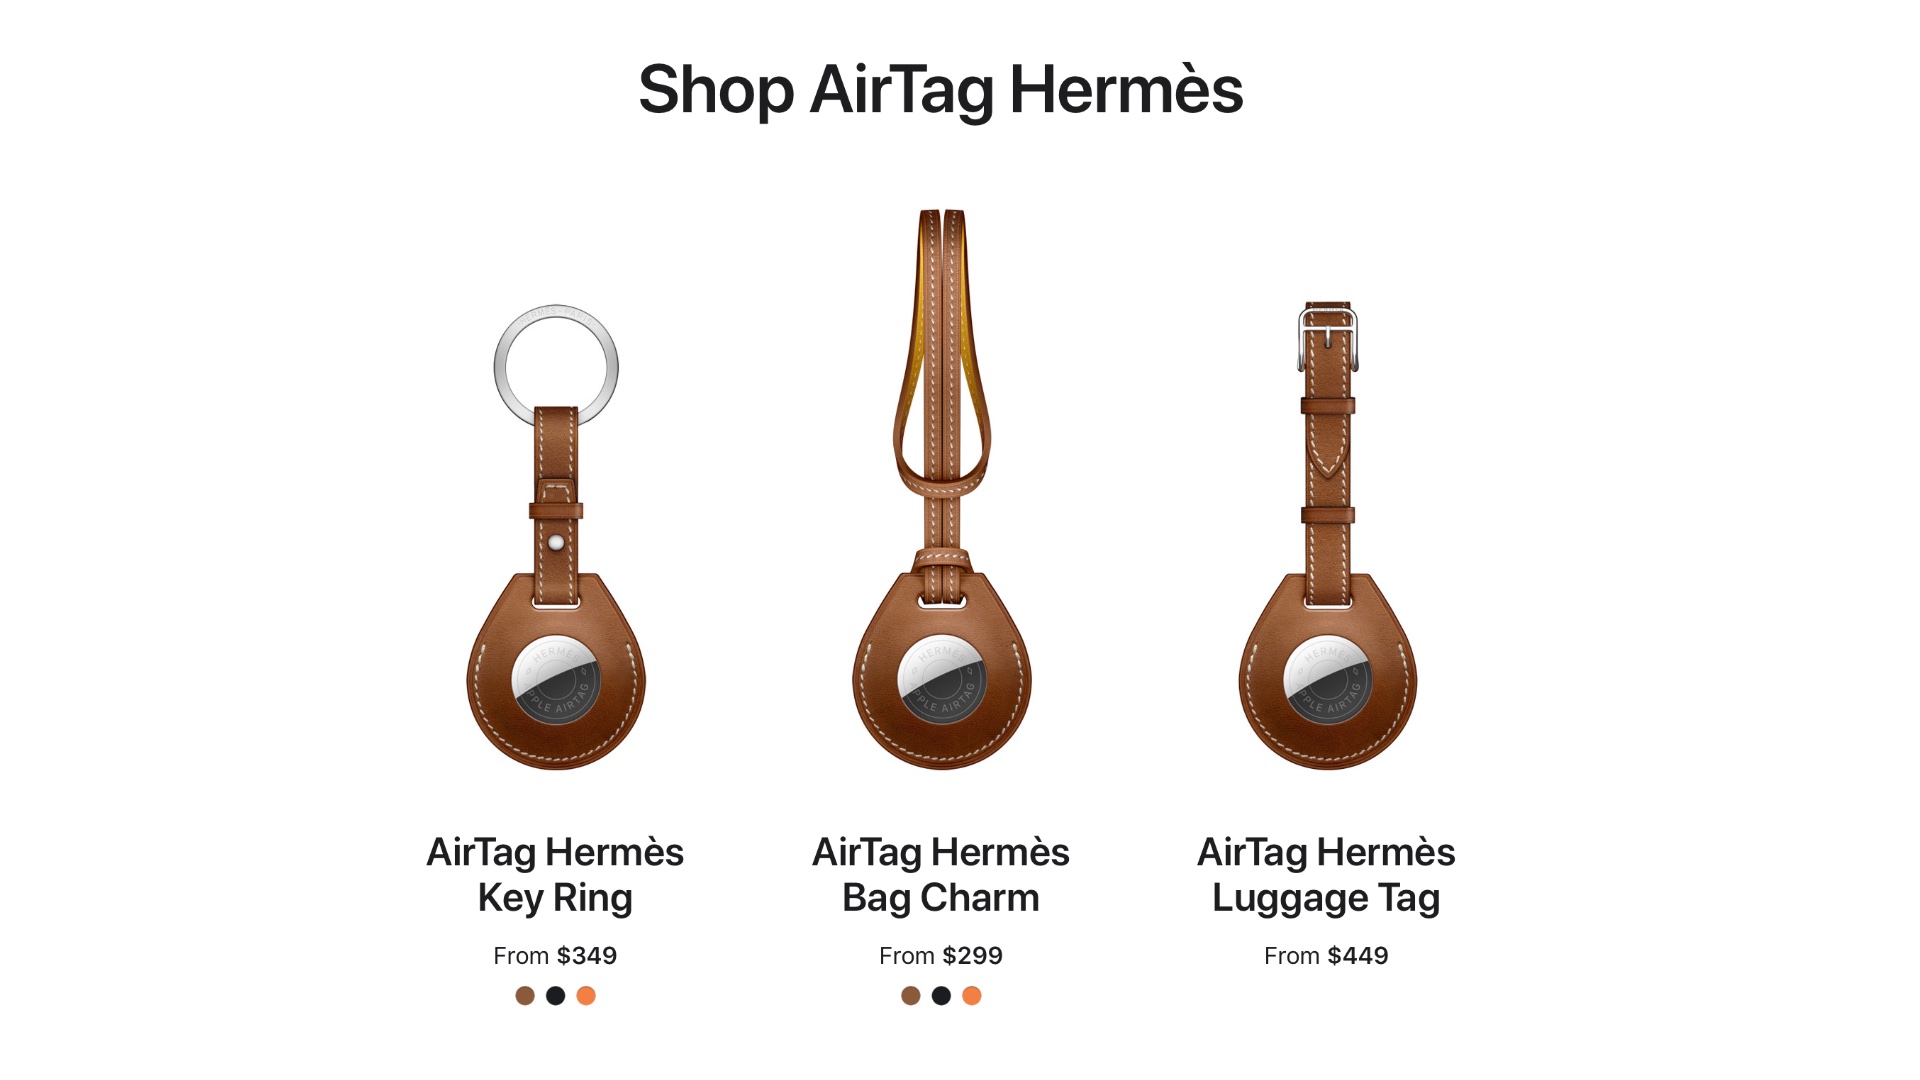 AirTag Hermès Currently Unavailable From Apple | MacRumors Forums